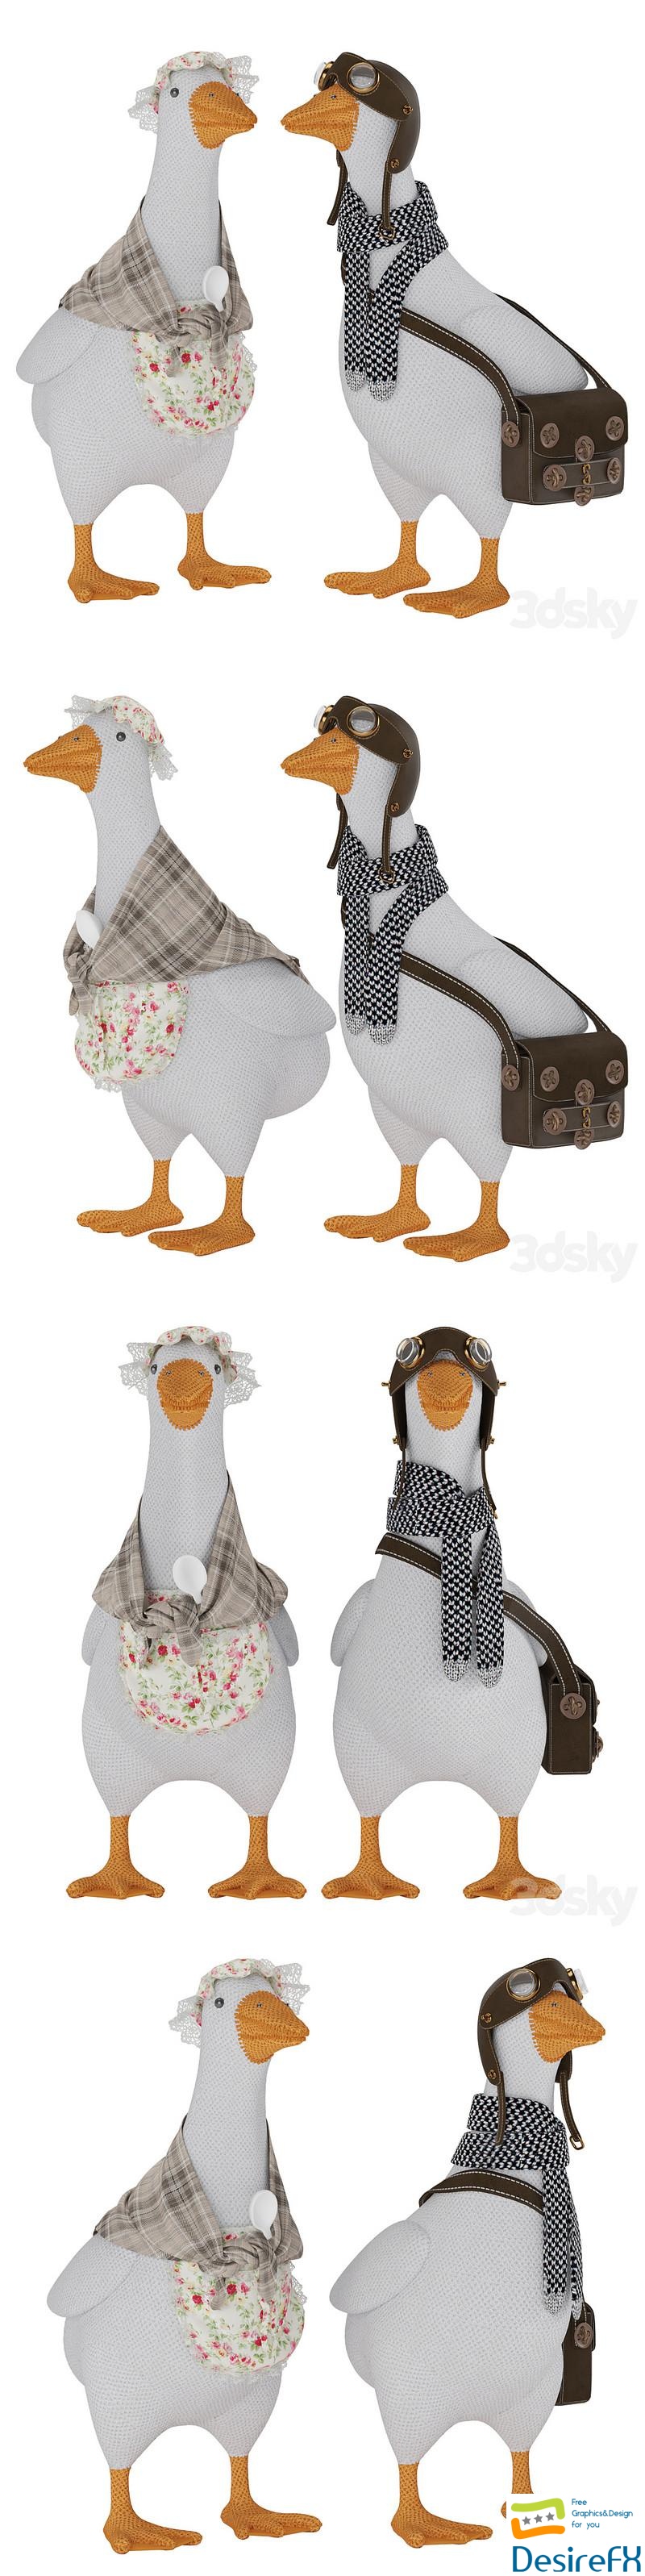 Knitted Geese 3D Model